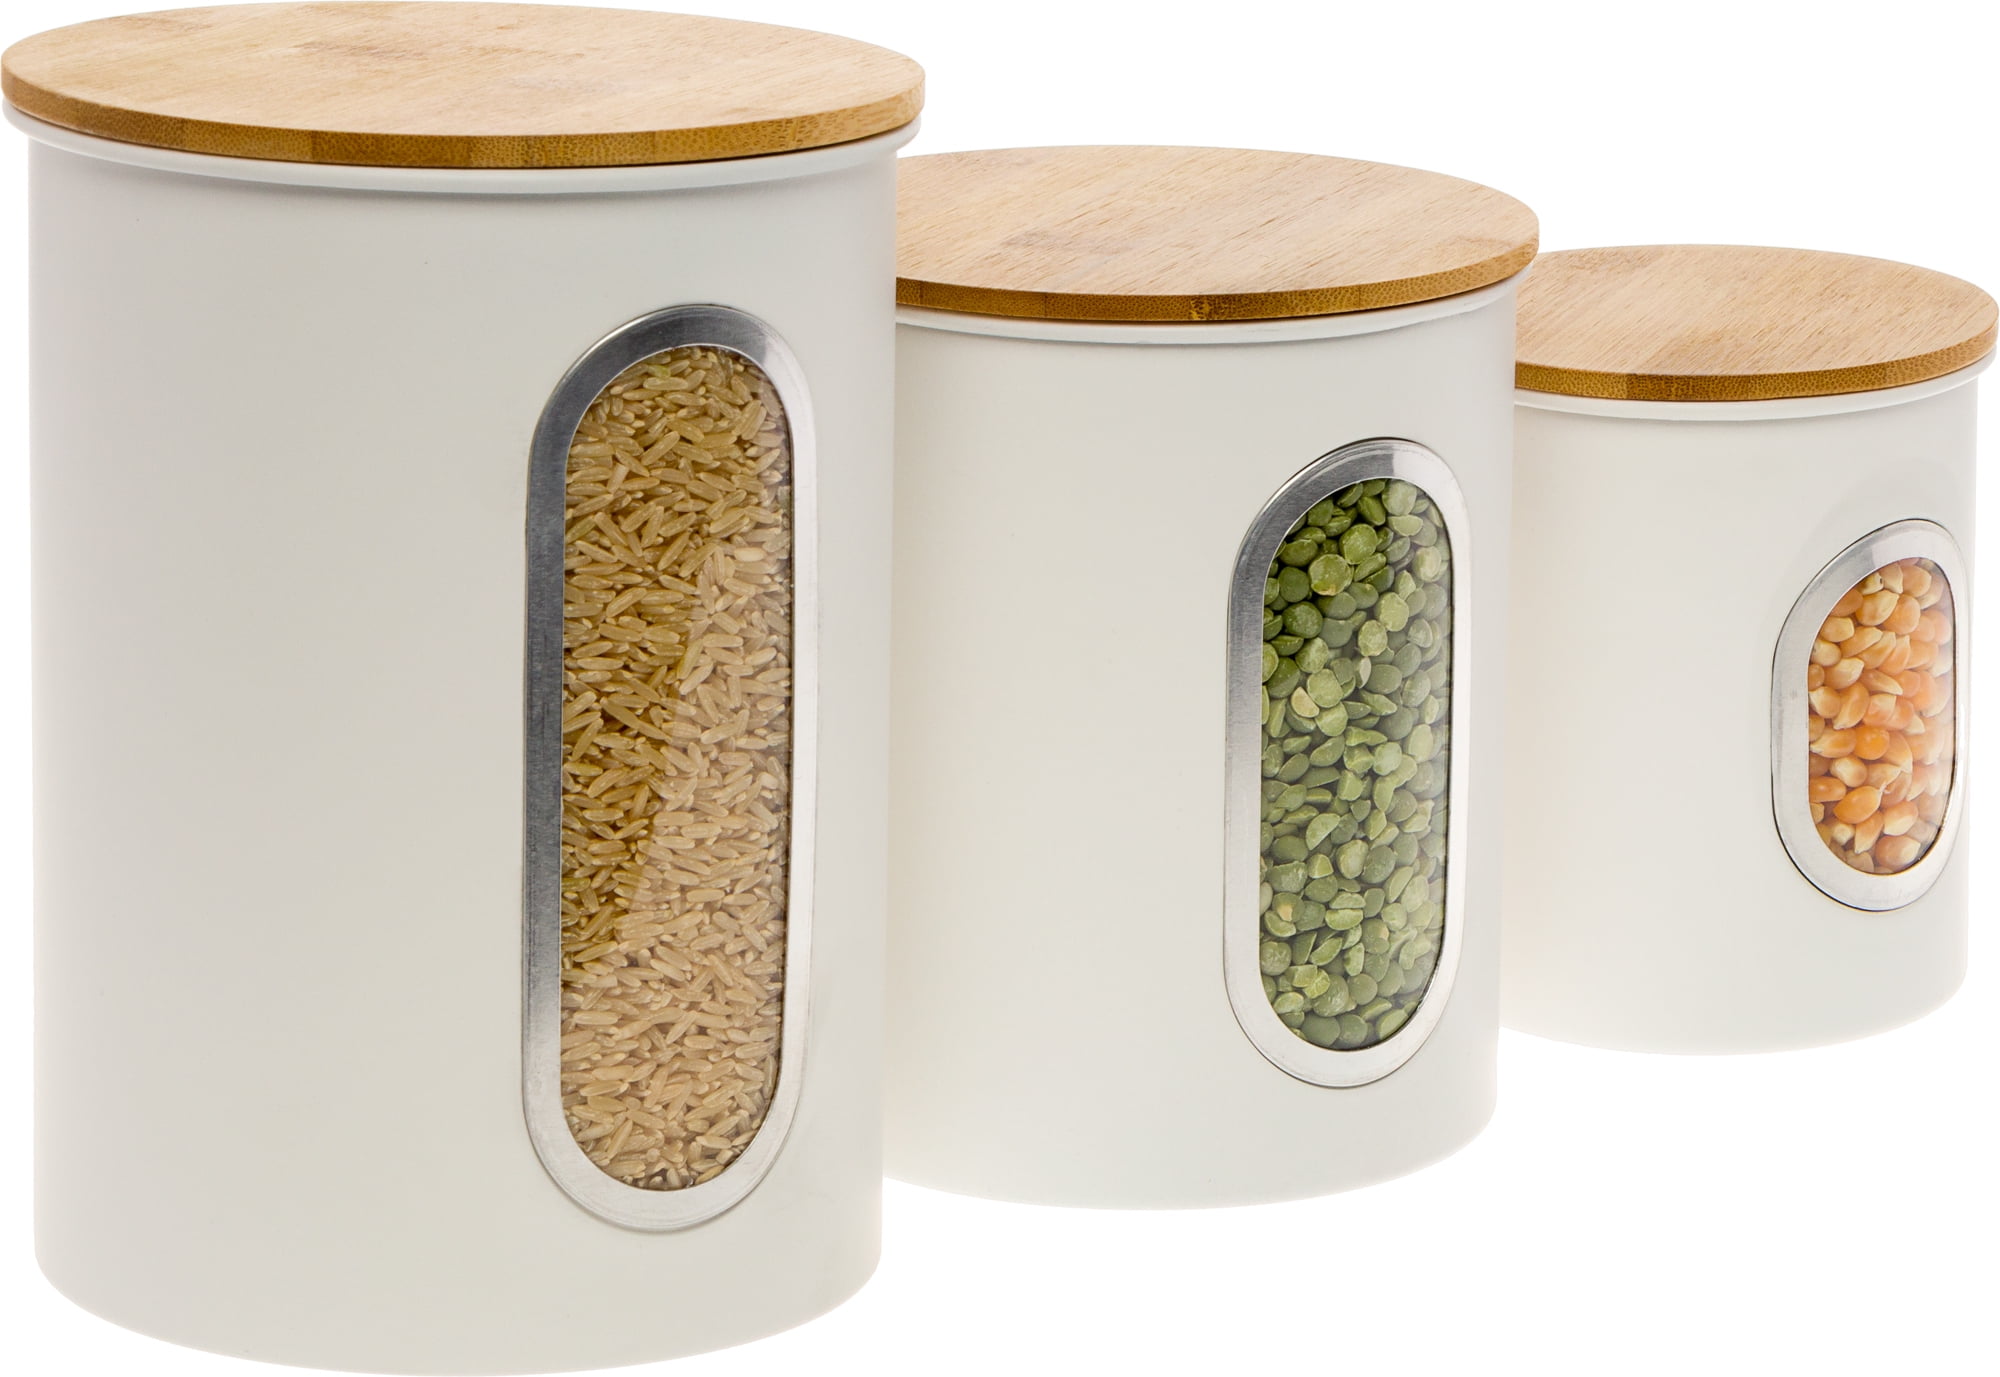 THEA 3-Piece Glass Food Storage Set with Bamboo Lids 